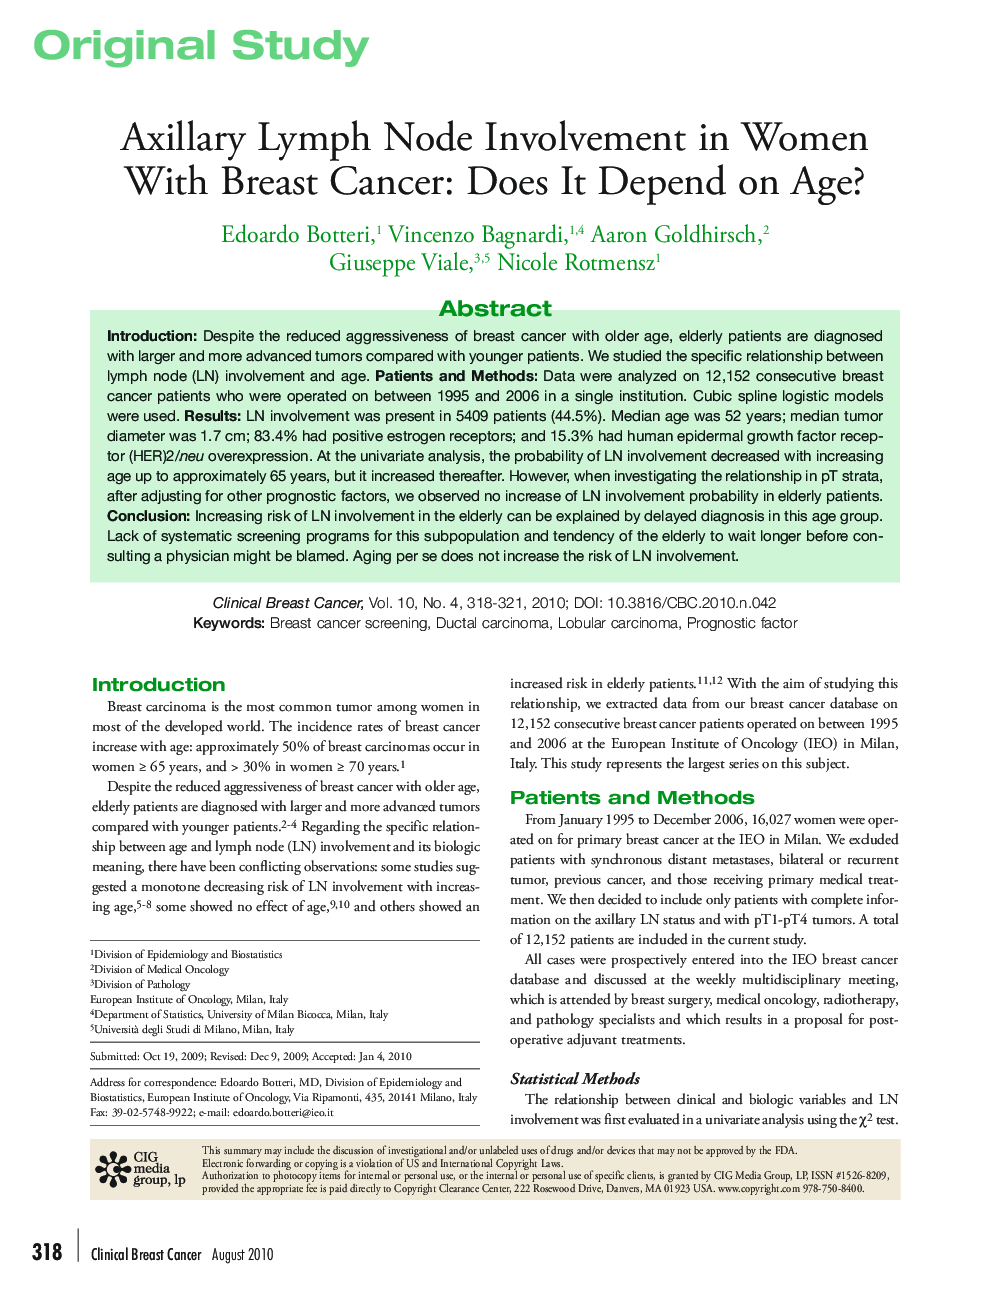 Axillary Lymph Node Involvement in Women With Breast Cancer: Does It Depend on Age? 